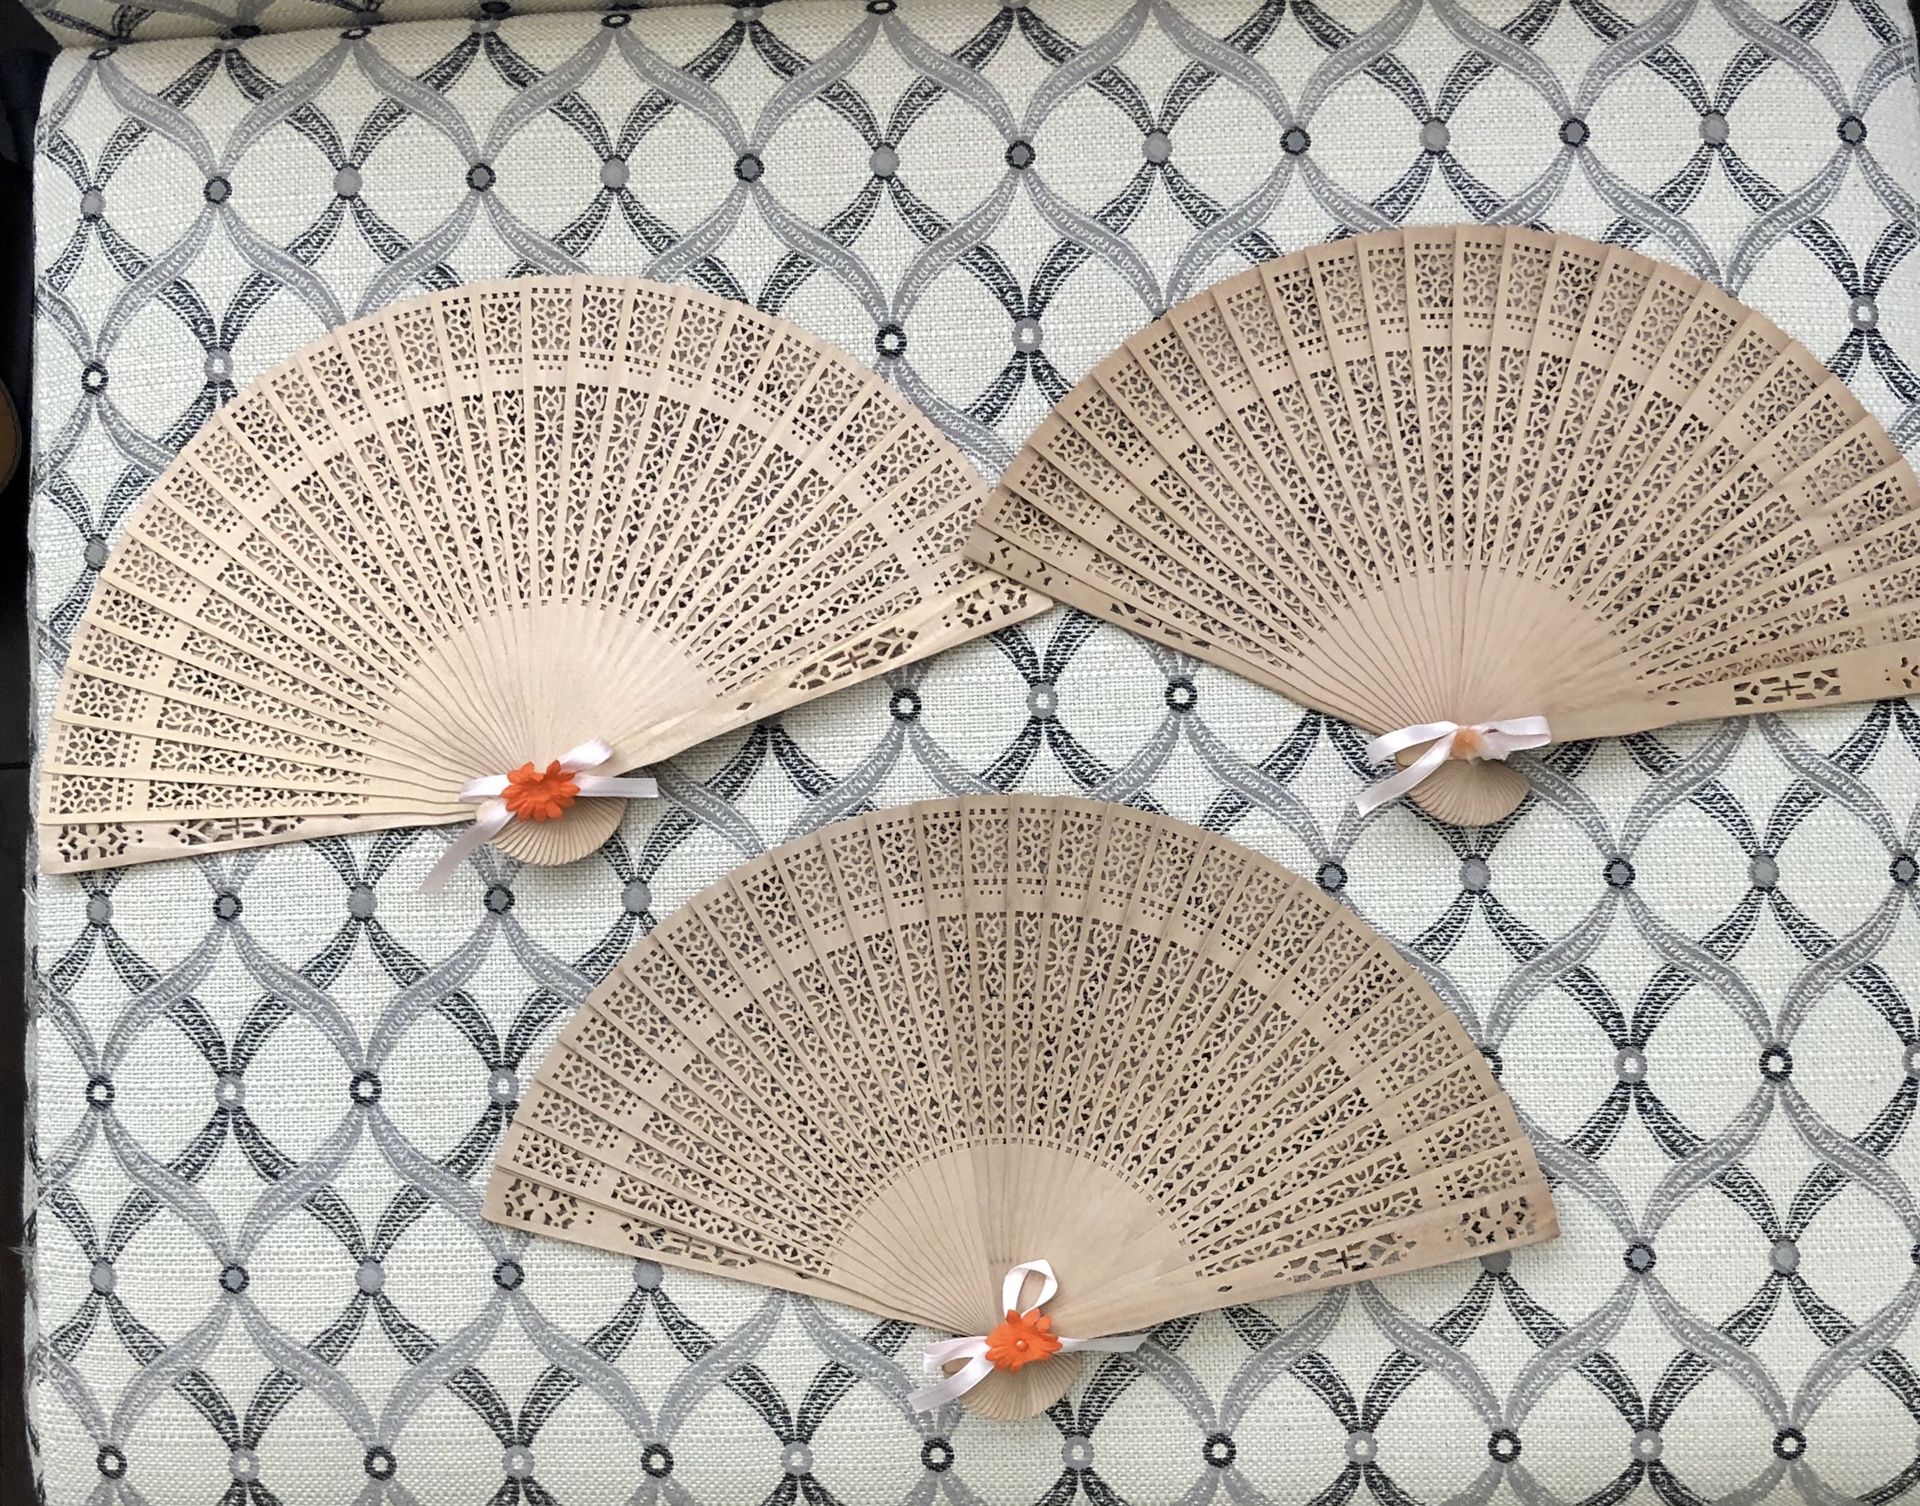 Three Handmade Chinese Fans - Take all Three - Send me an offer